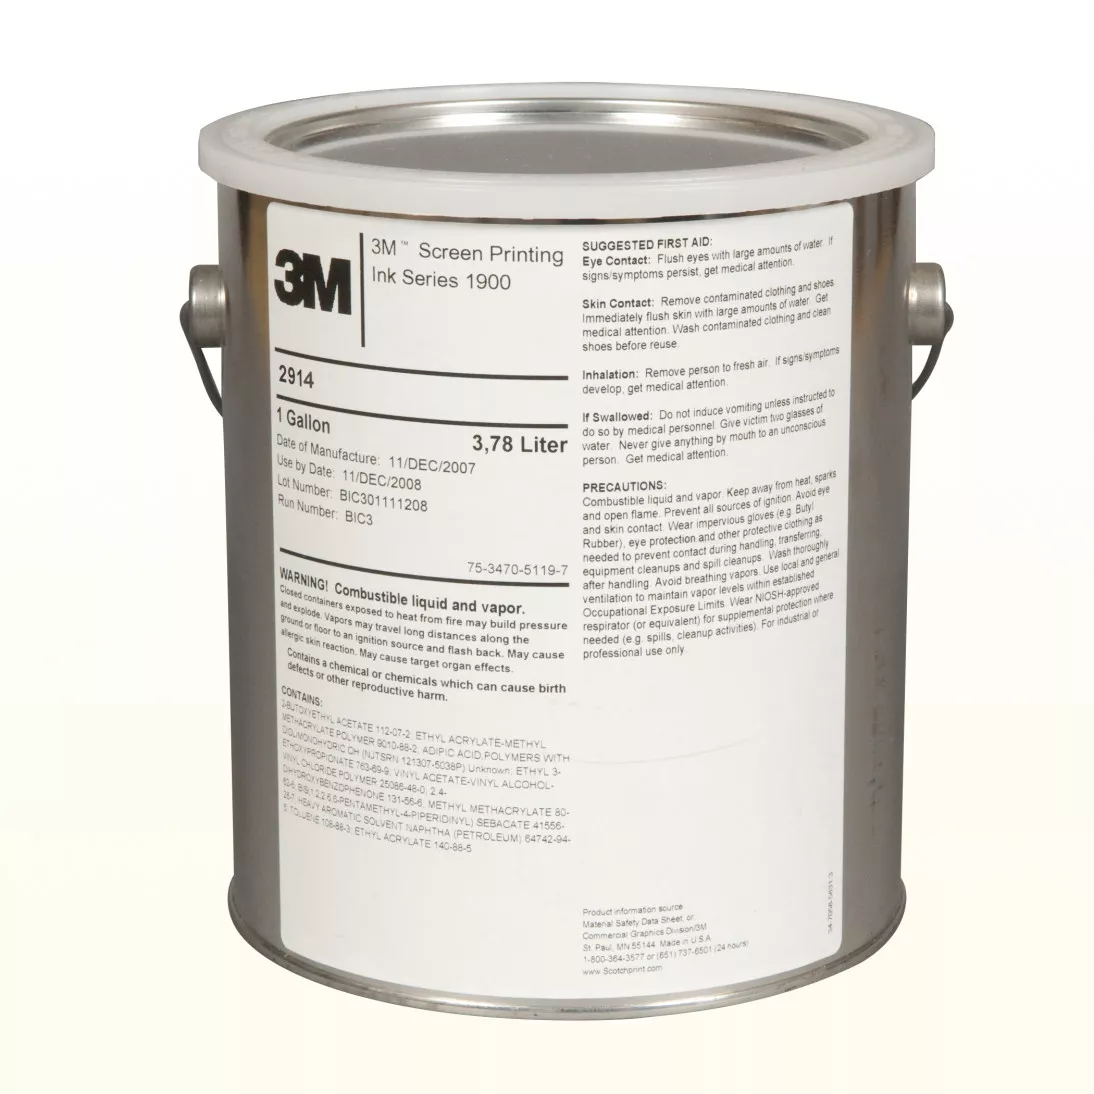 3M™ Scotchlite™ Transparent Screen Printing Ink 2914, Yellow, 1 Gallon
Container